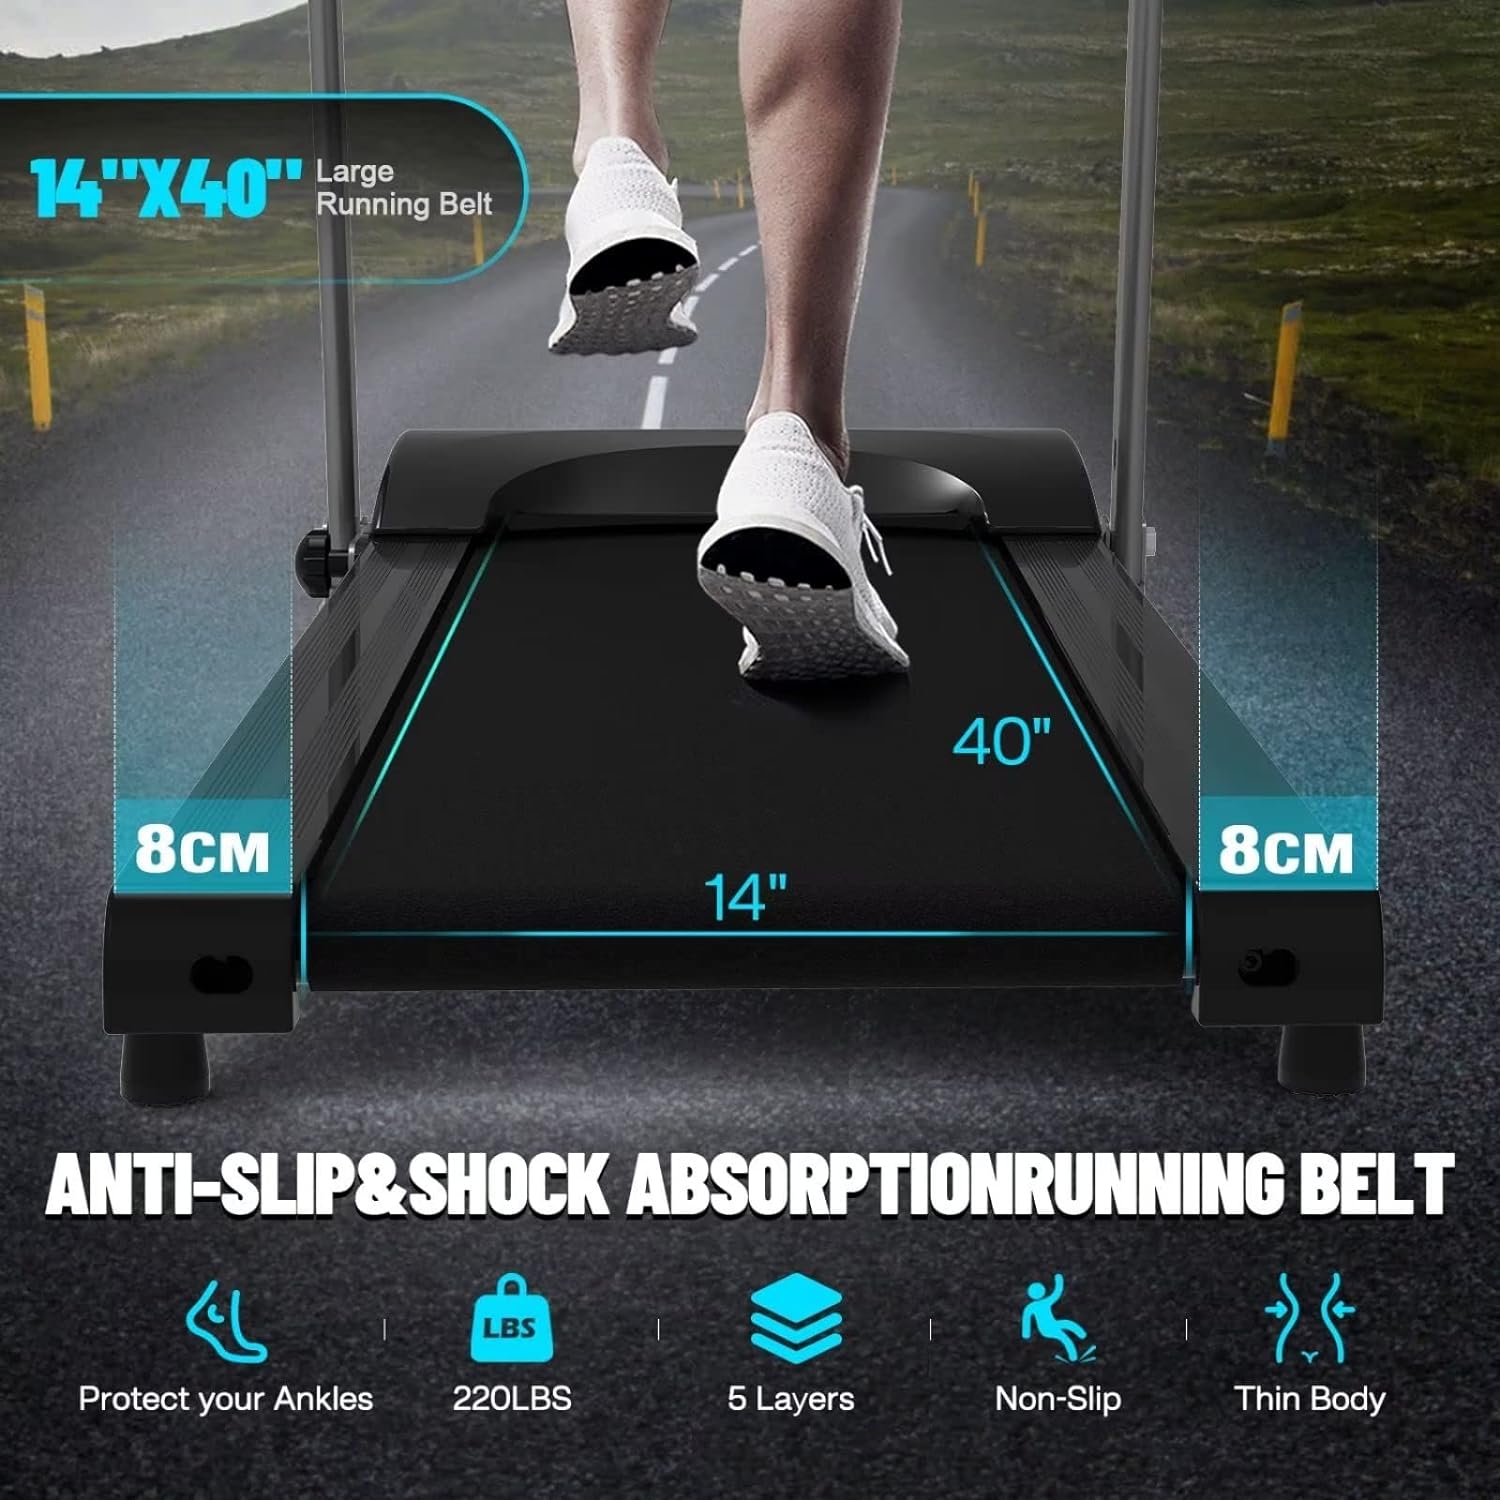 Treadmill,Treadmills for Home,Home Foldable Treadmill with Incline,2.5HP Portable Foldable Treadmill with 15 Pre Set Programs and LED Display Panel